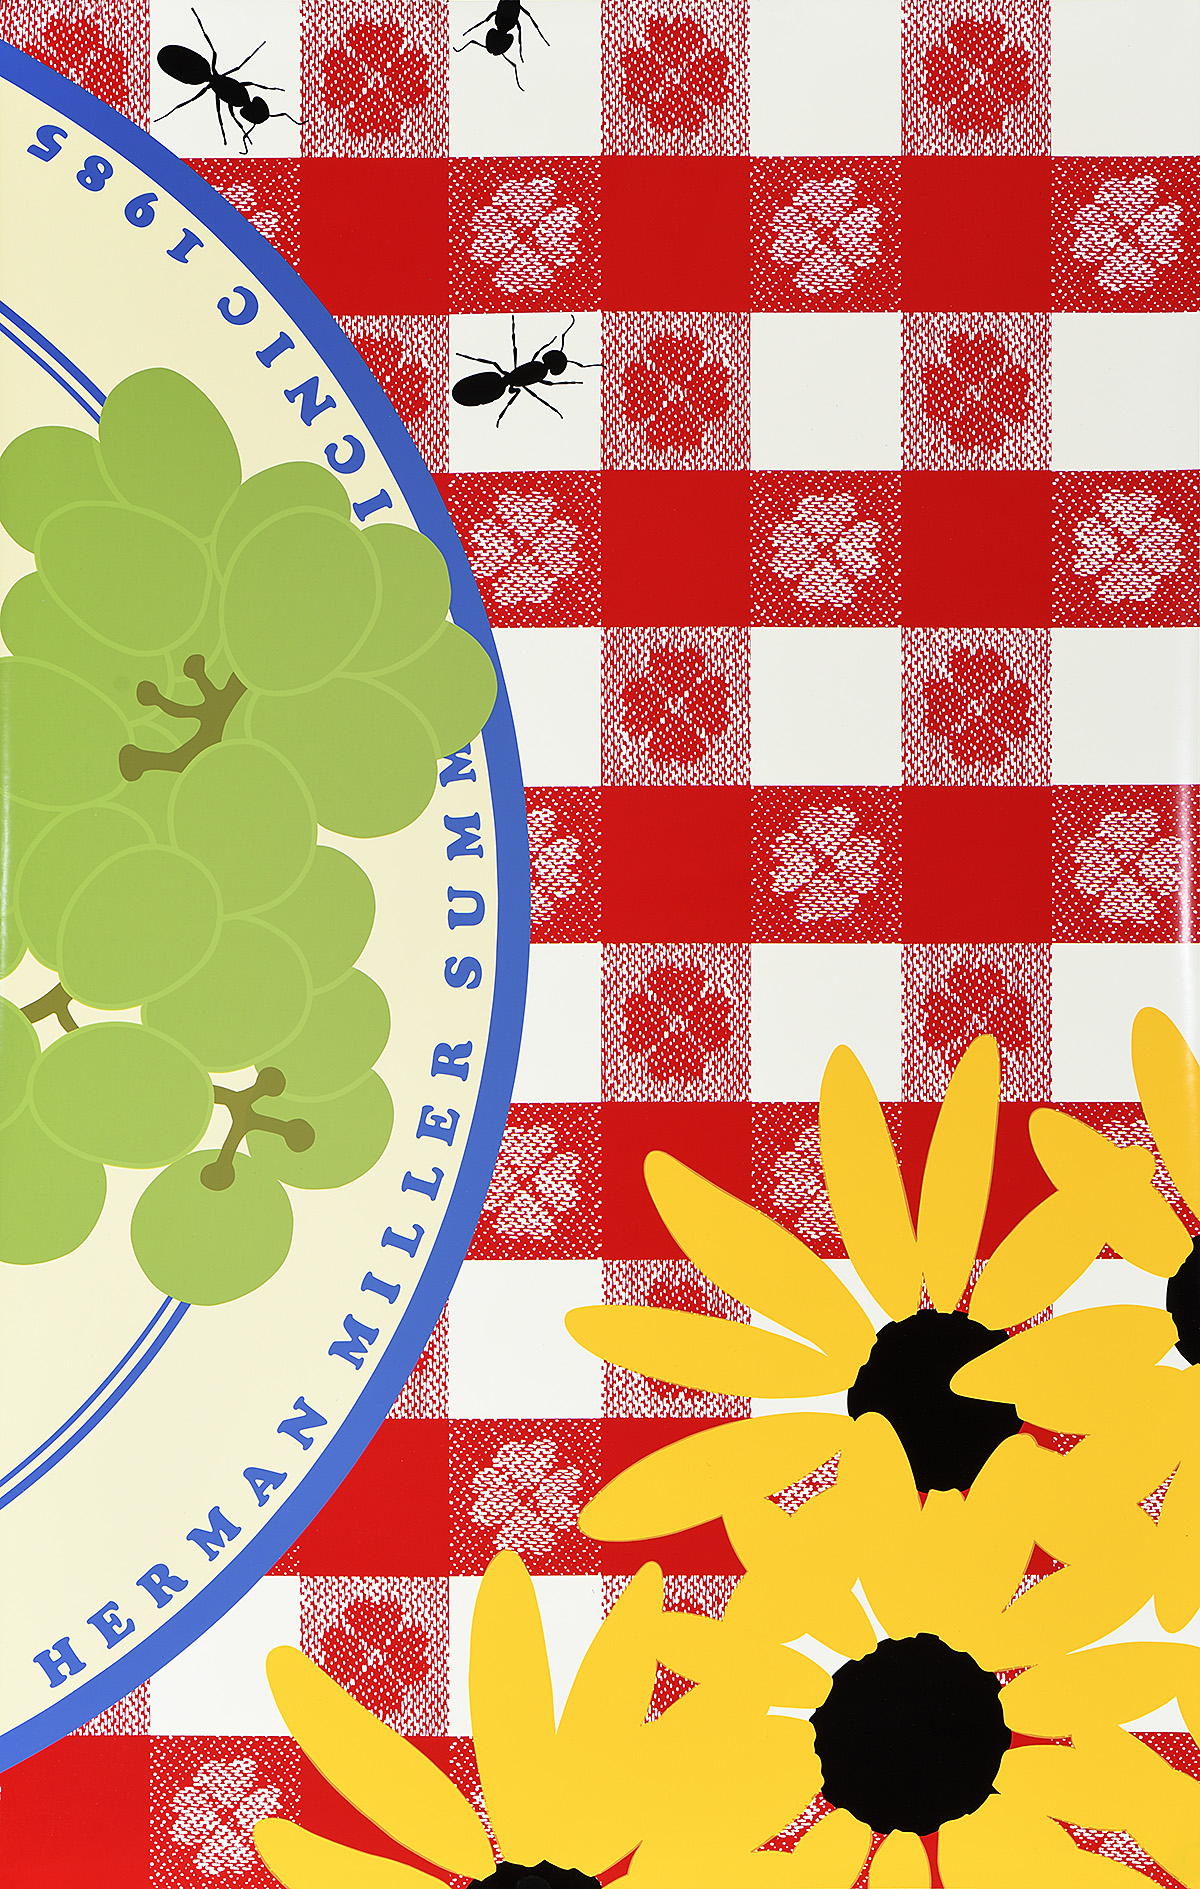 An illustrational poster of grapes, sunflowers, and crawling ants on top of a plaid tablecloth.